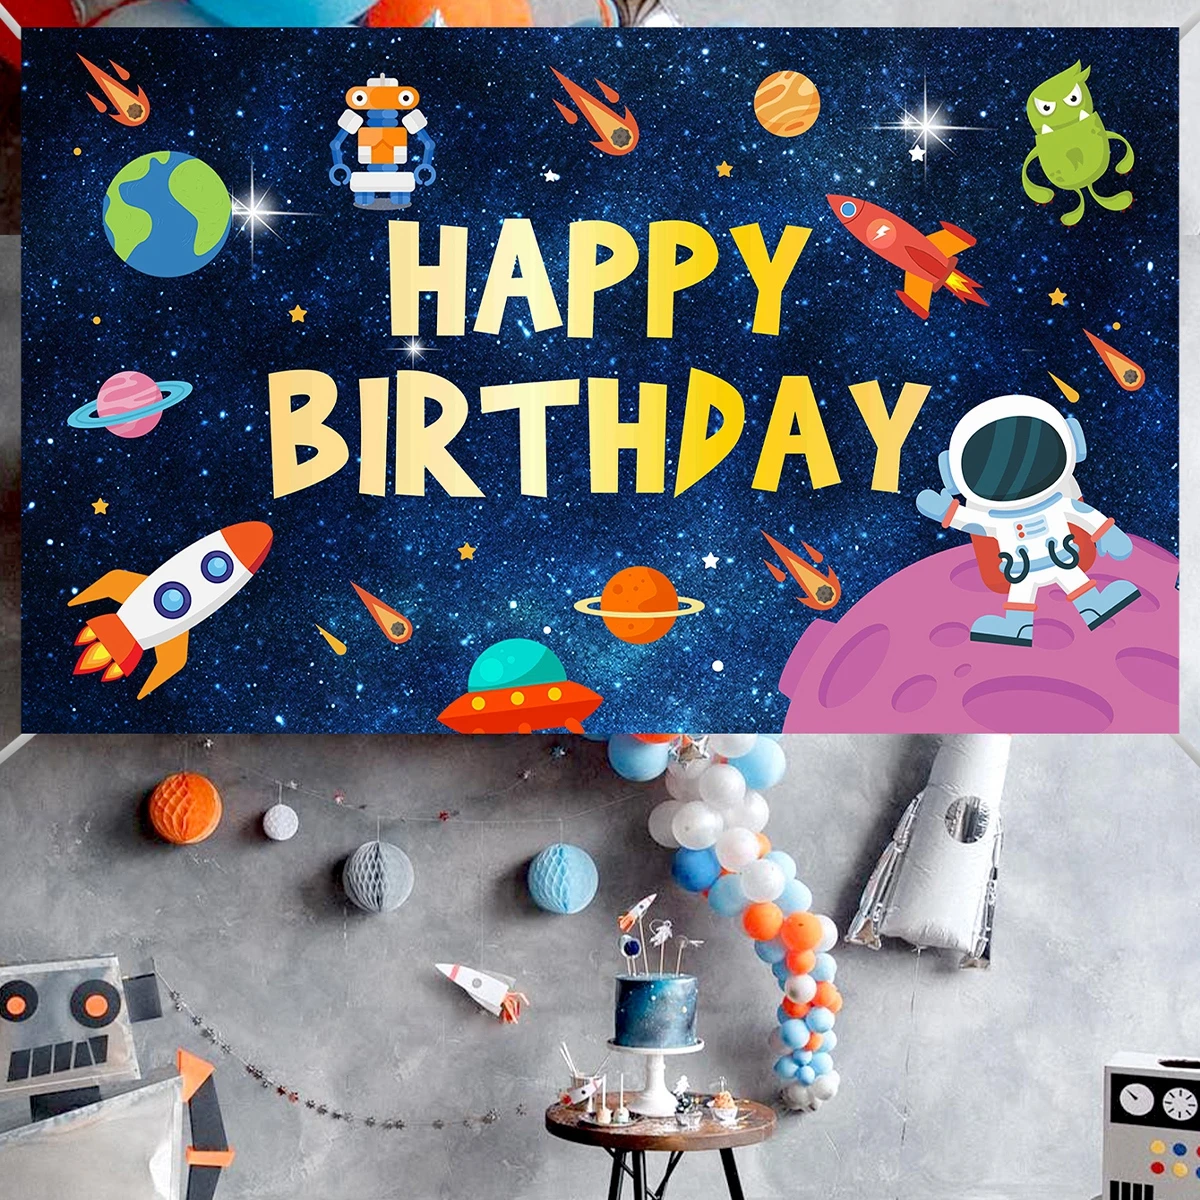 

Universe Space Background Cloth Planet Spacecraft Astronaut Backdrop Baby Boy Birthday Party Decor Starry Sky Backdrop Banner